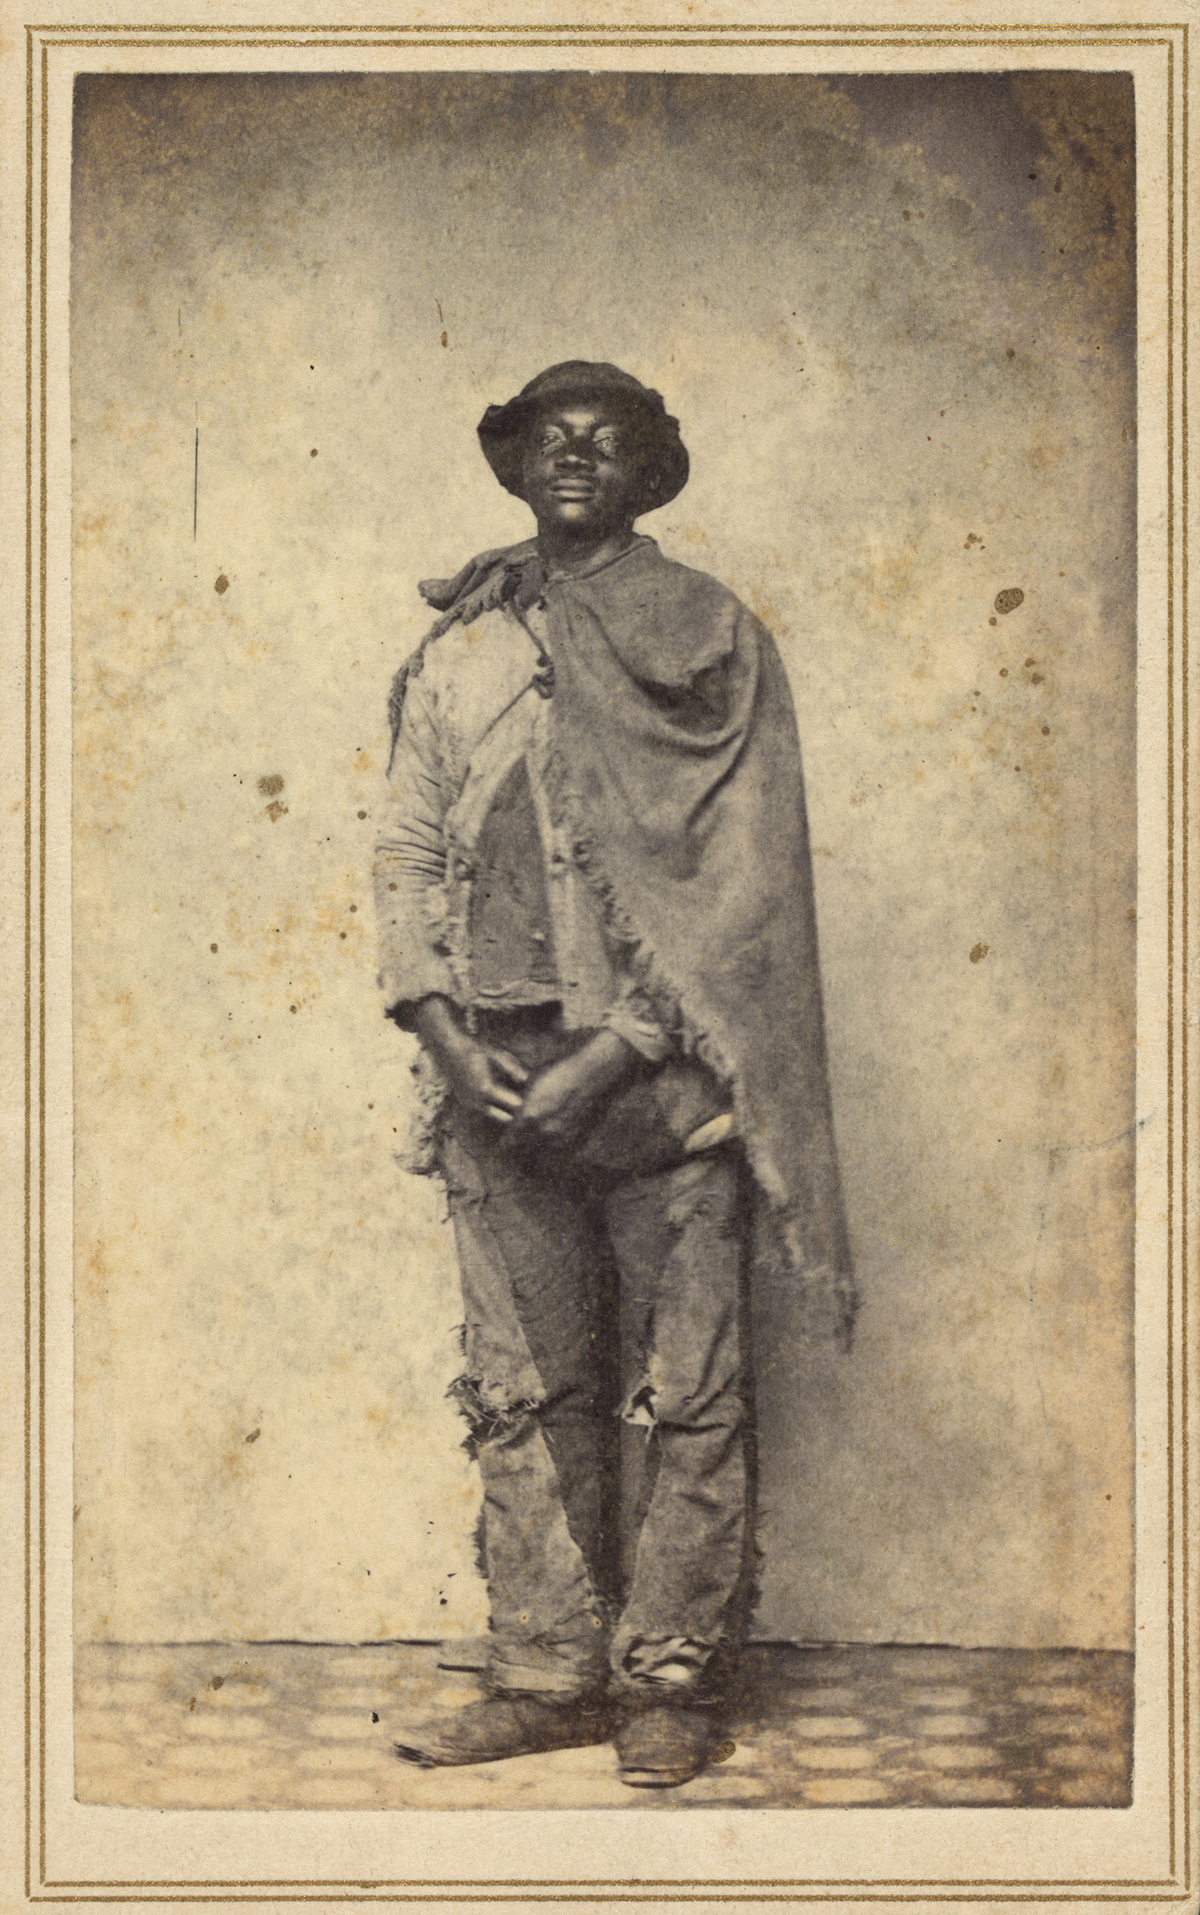 William Heady, New Bern, June 1864. According to an inscription on the back of this photograph, Heady escaped from a plantation near Raleigh and “arrived at Newberne (sic) N.C. on the 20th May 1864 having been six weeks on the road, neither sleeping or eating in a house during the time.” He was one of thousands of escaped slaves that made their way to New Bern and Beaufort during the Civil War. Courtesy, Library of Congress 